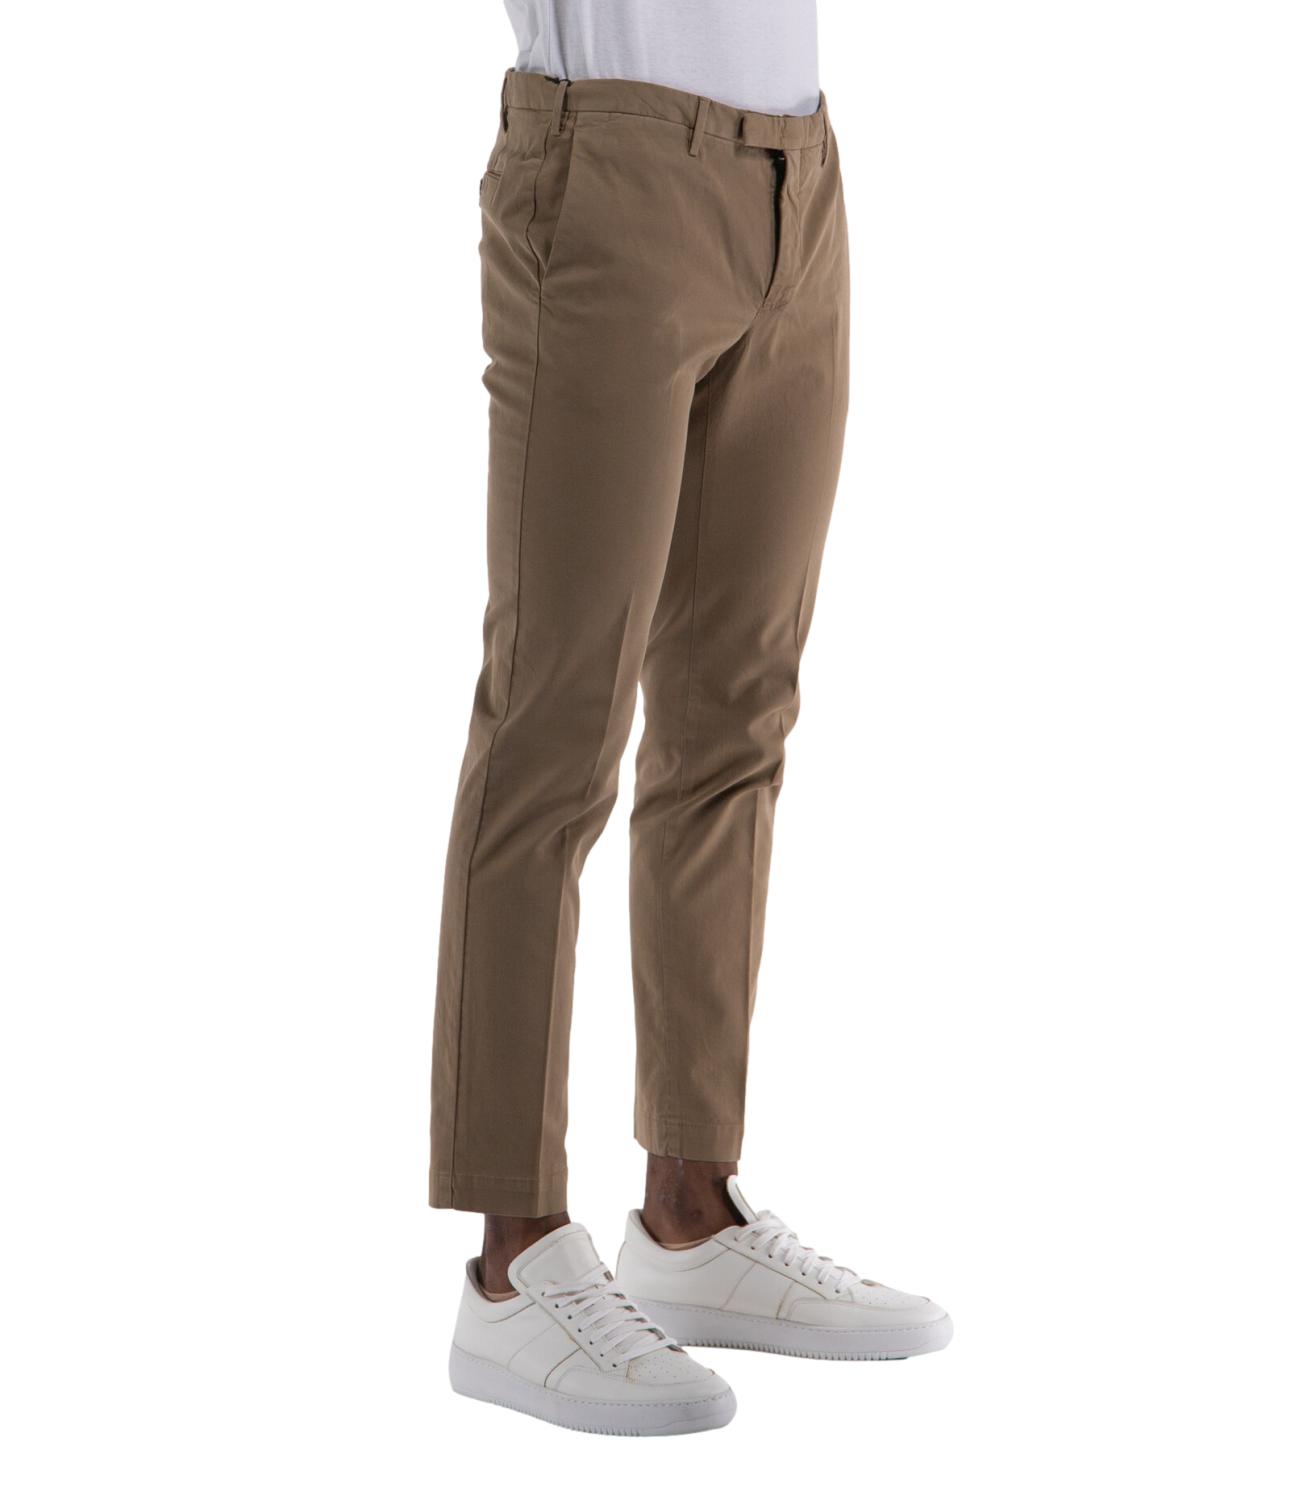 PT Torino men's trousers in colonial camel color L.30